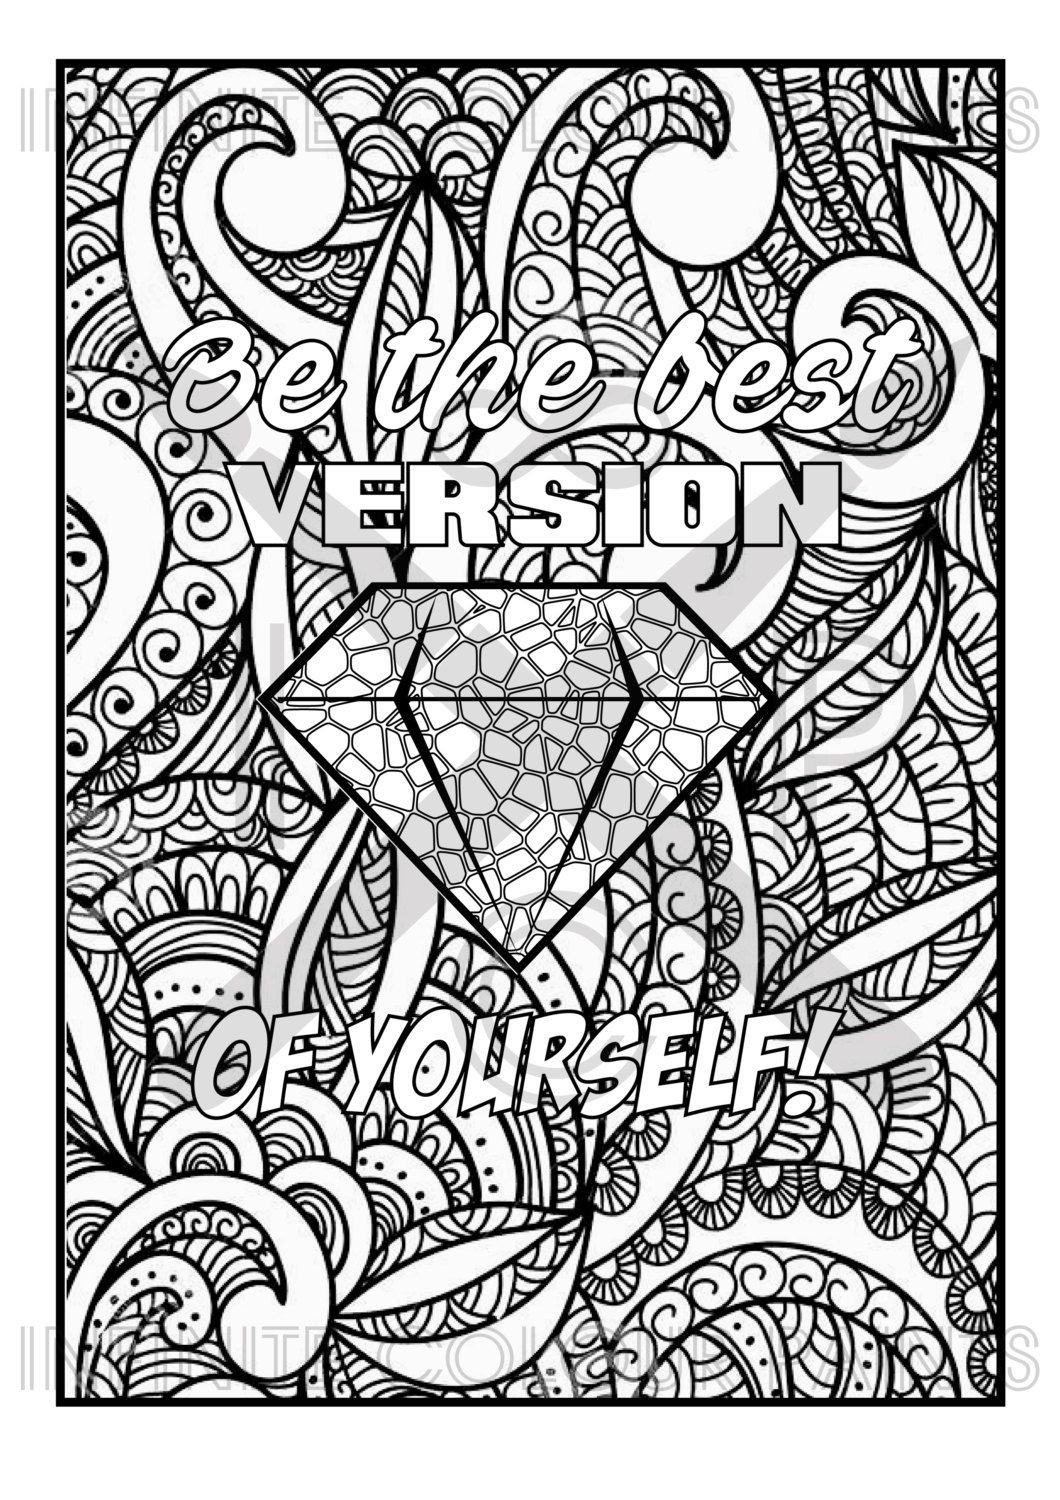 Quote Coloring Pages For Adults
 Coloring page Adult coloring Coloring book by